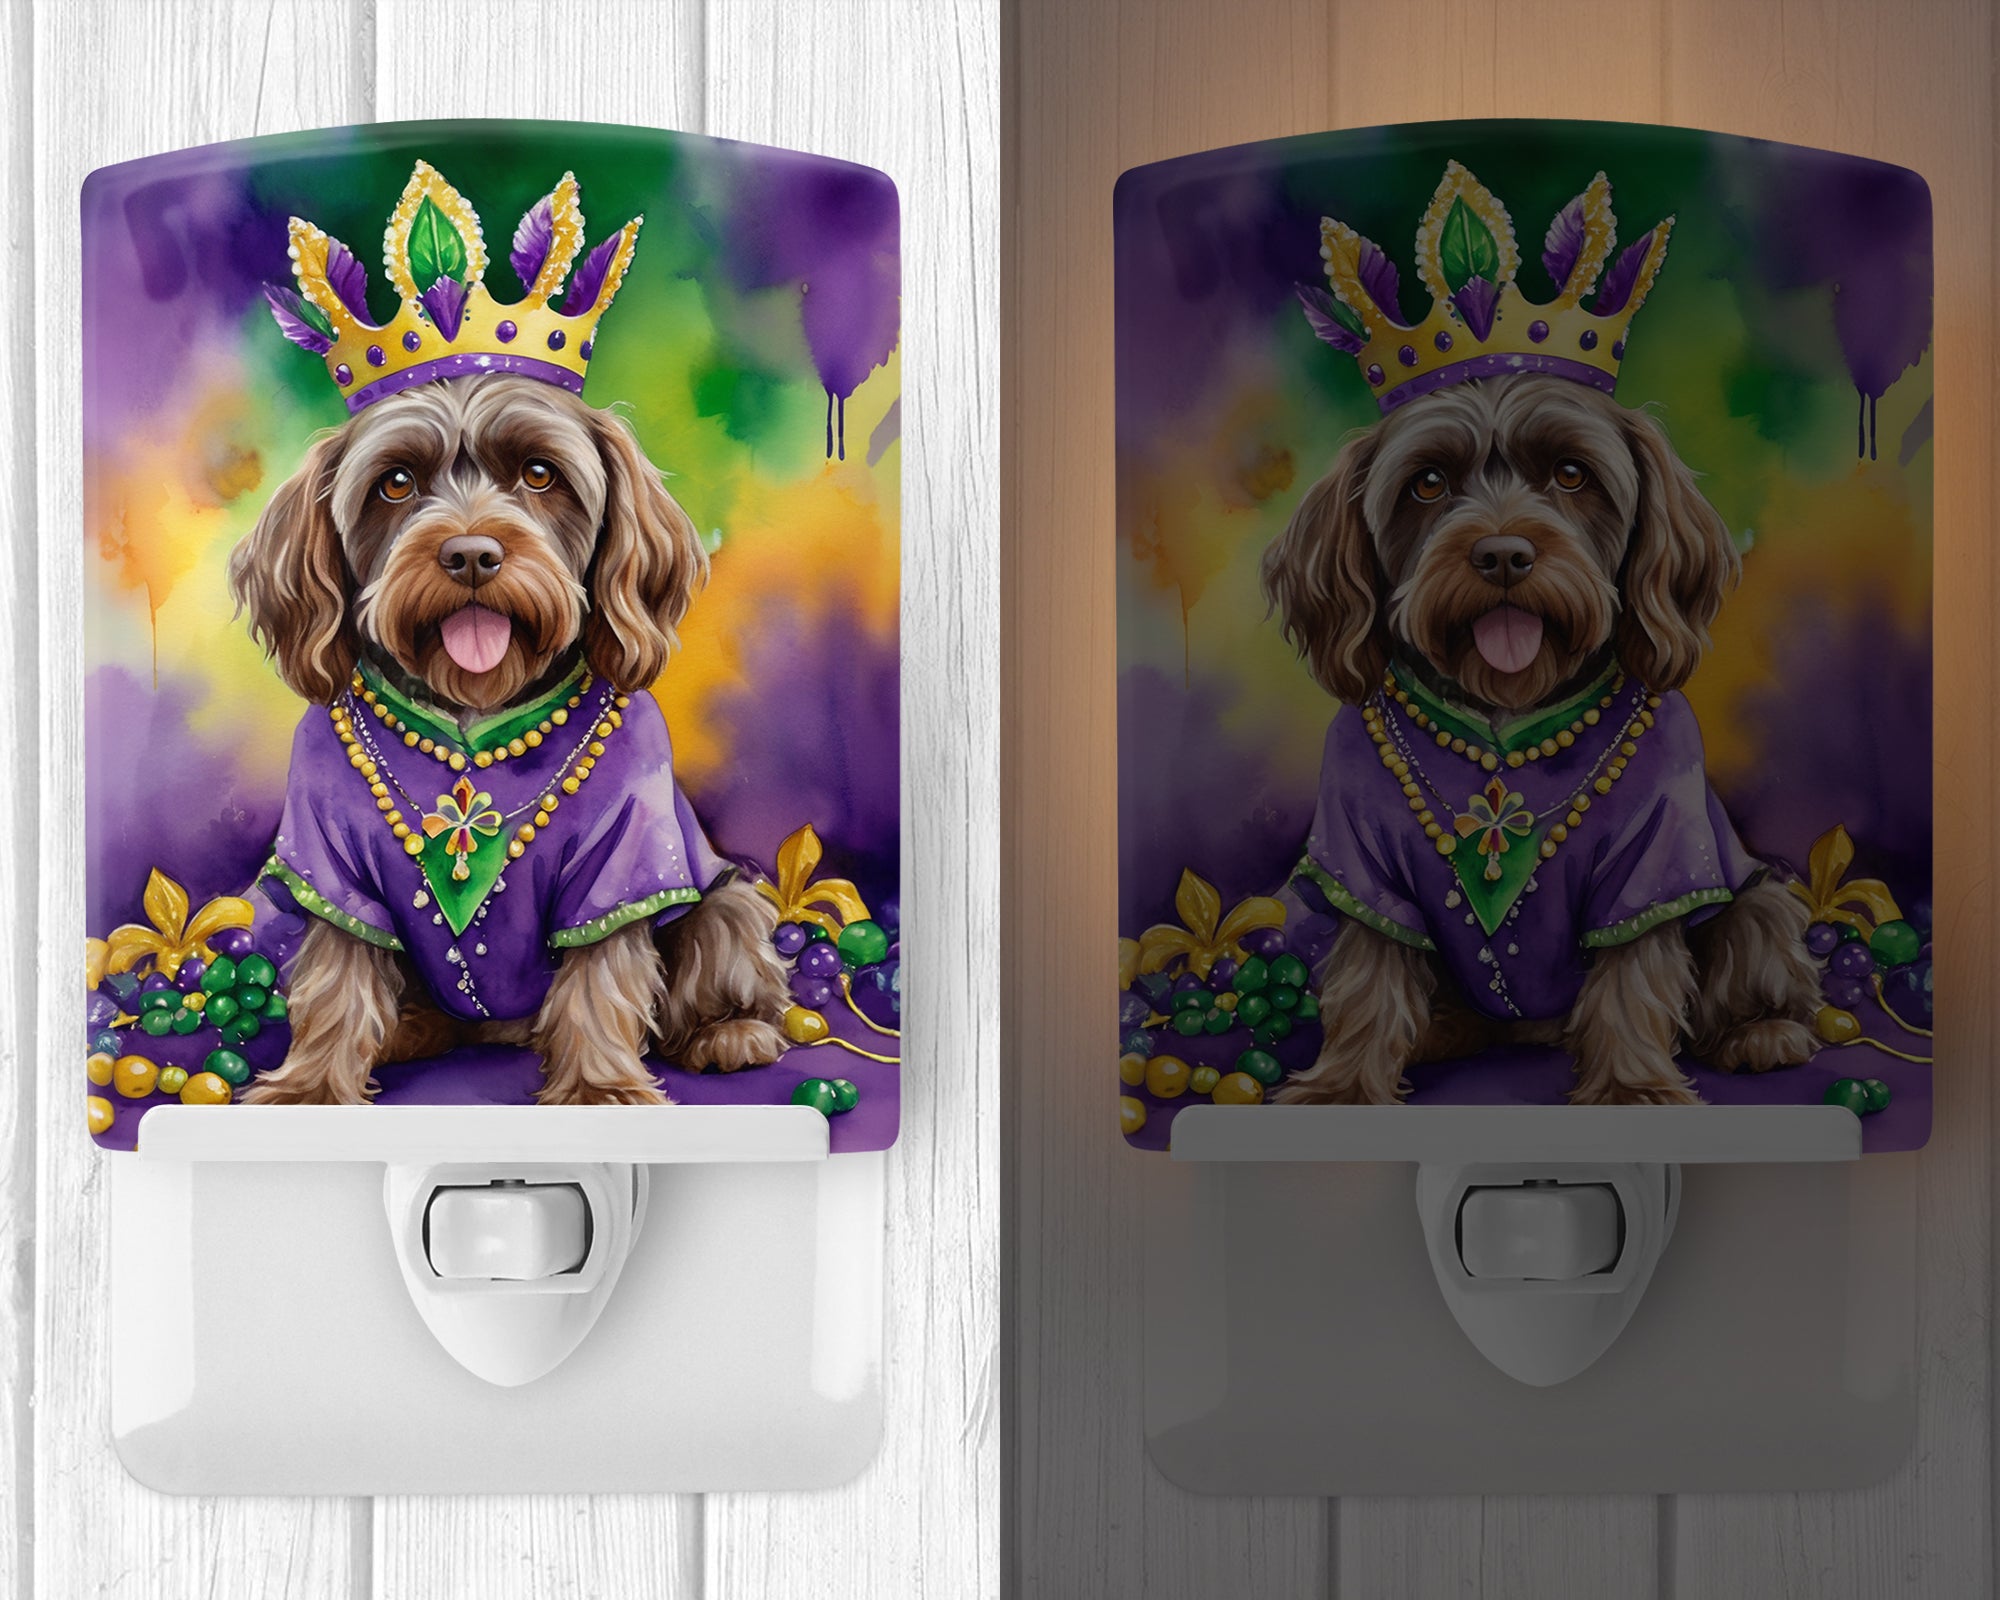 Buy this Wirehaired Pointing Griffon King of Mardi Gras Ceramic Night Light